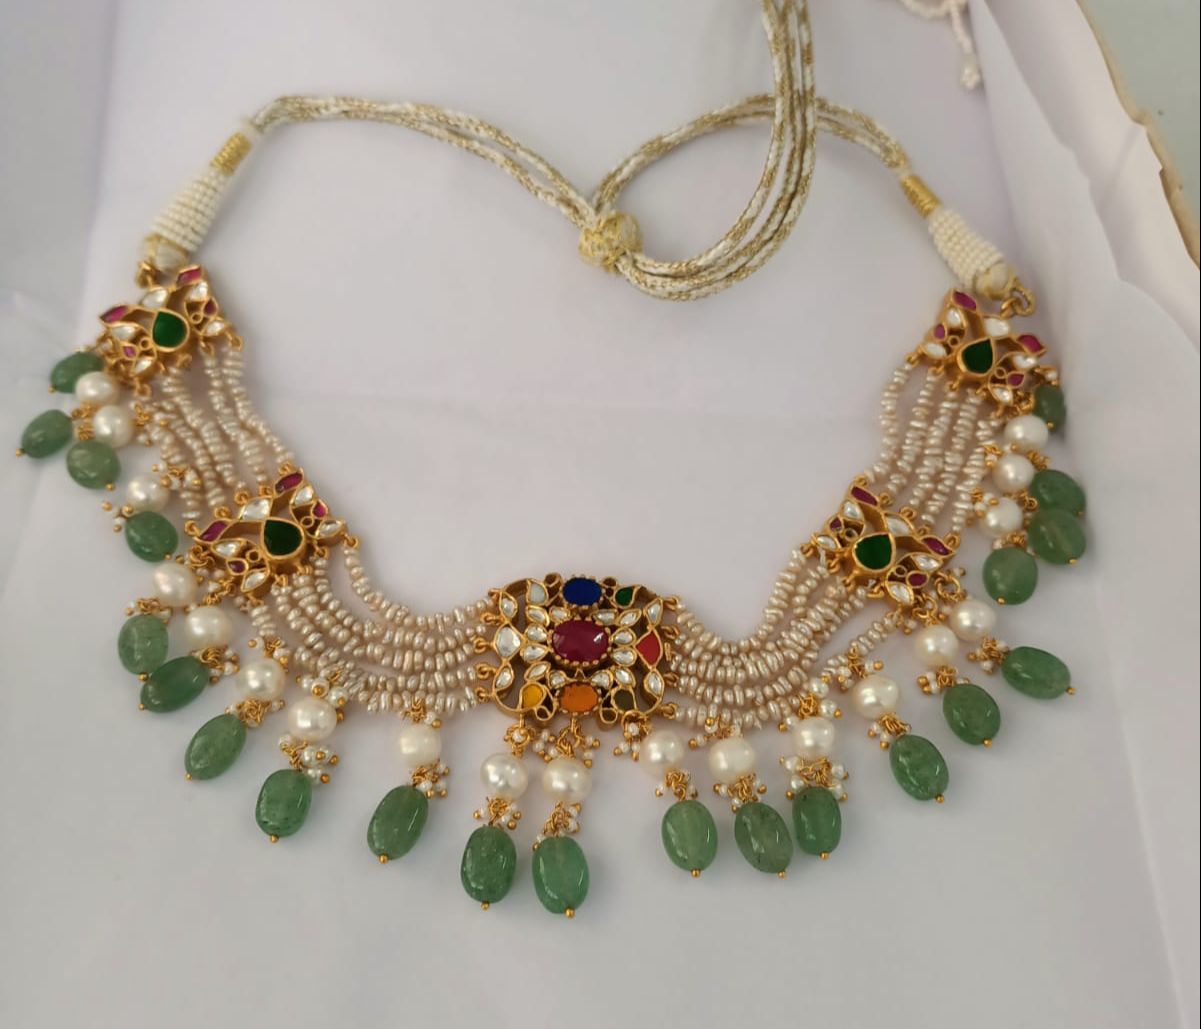 Navrattan choker,

Sterling silver choker with navratan stones and grapes aventurine drops, 1 micron gold plated. 